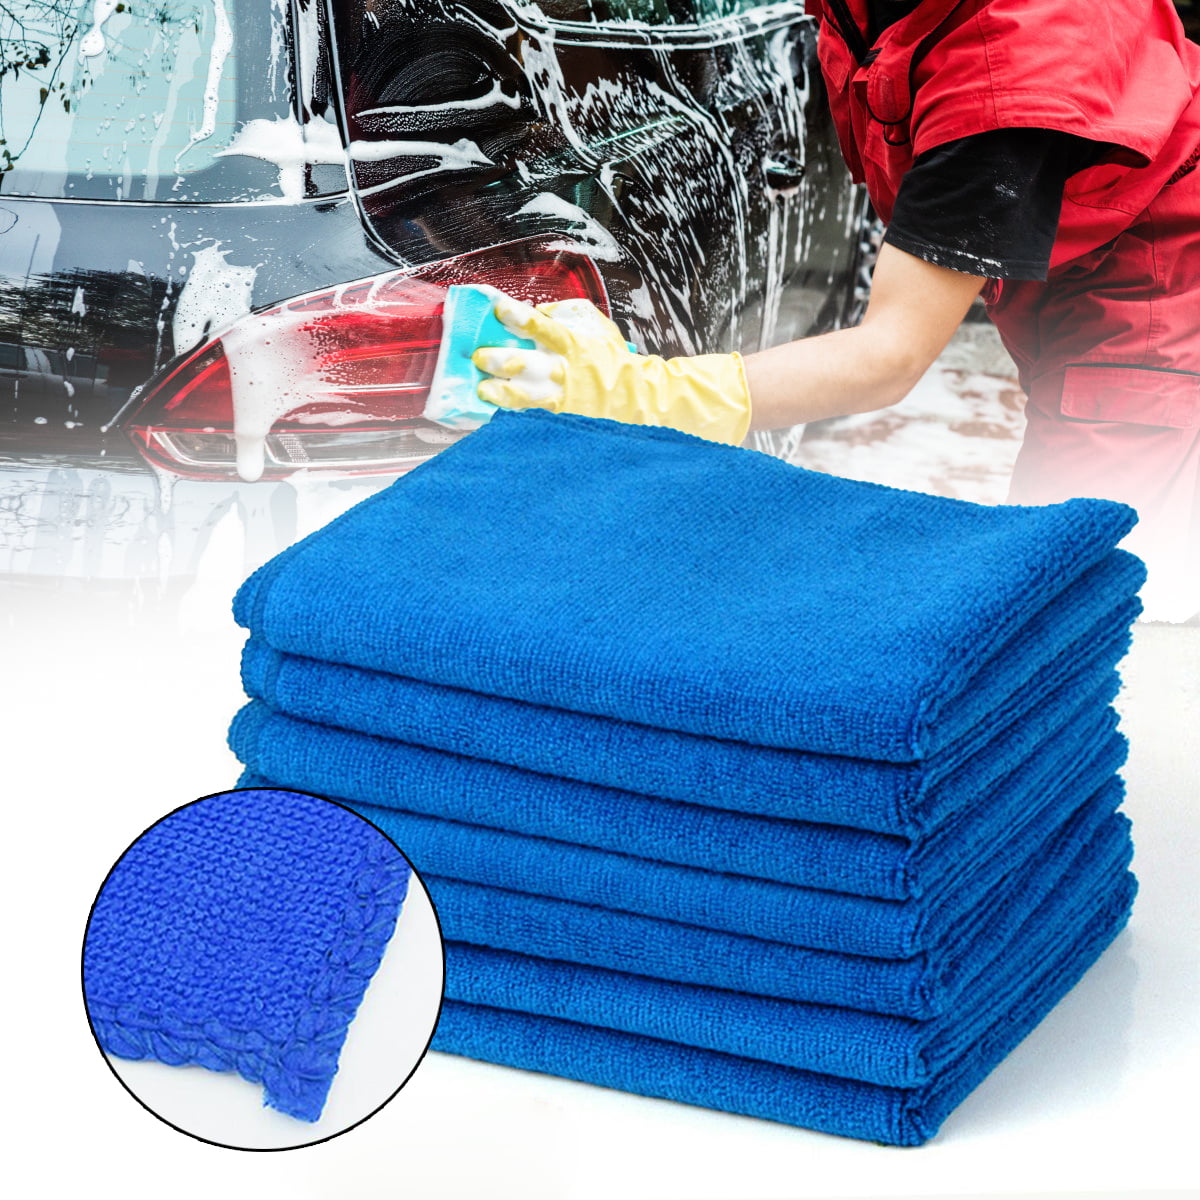 10 x Safe & Absorbant Microfibre Car & Home Cleaning,Wash & Valeting Towel Cloth 